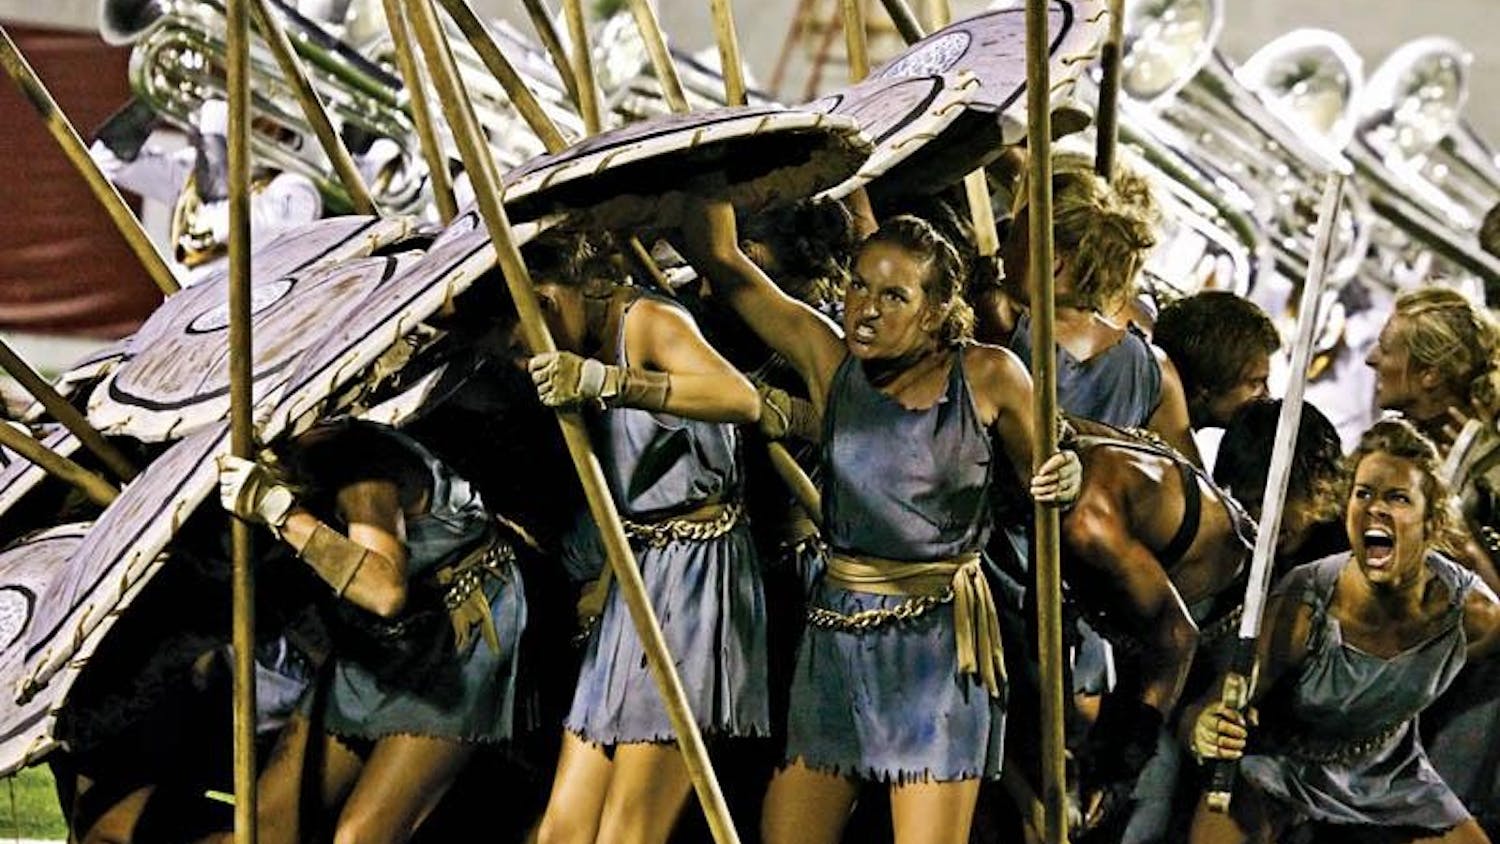 Members of the Phantom Regiment Colorguard prepare to attack the "Emperor" in their performance of "Spartacus."  